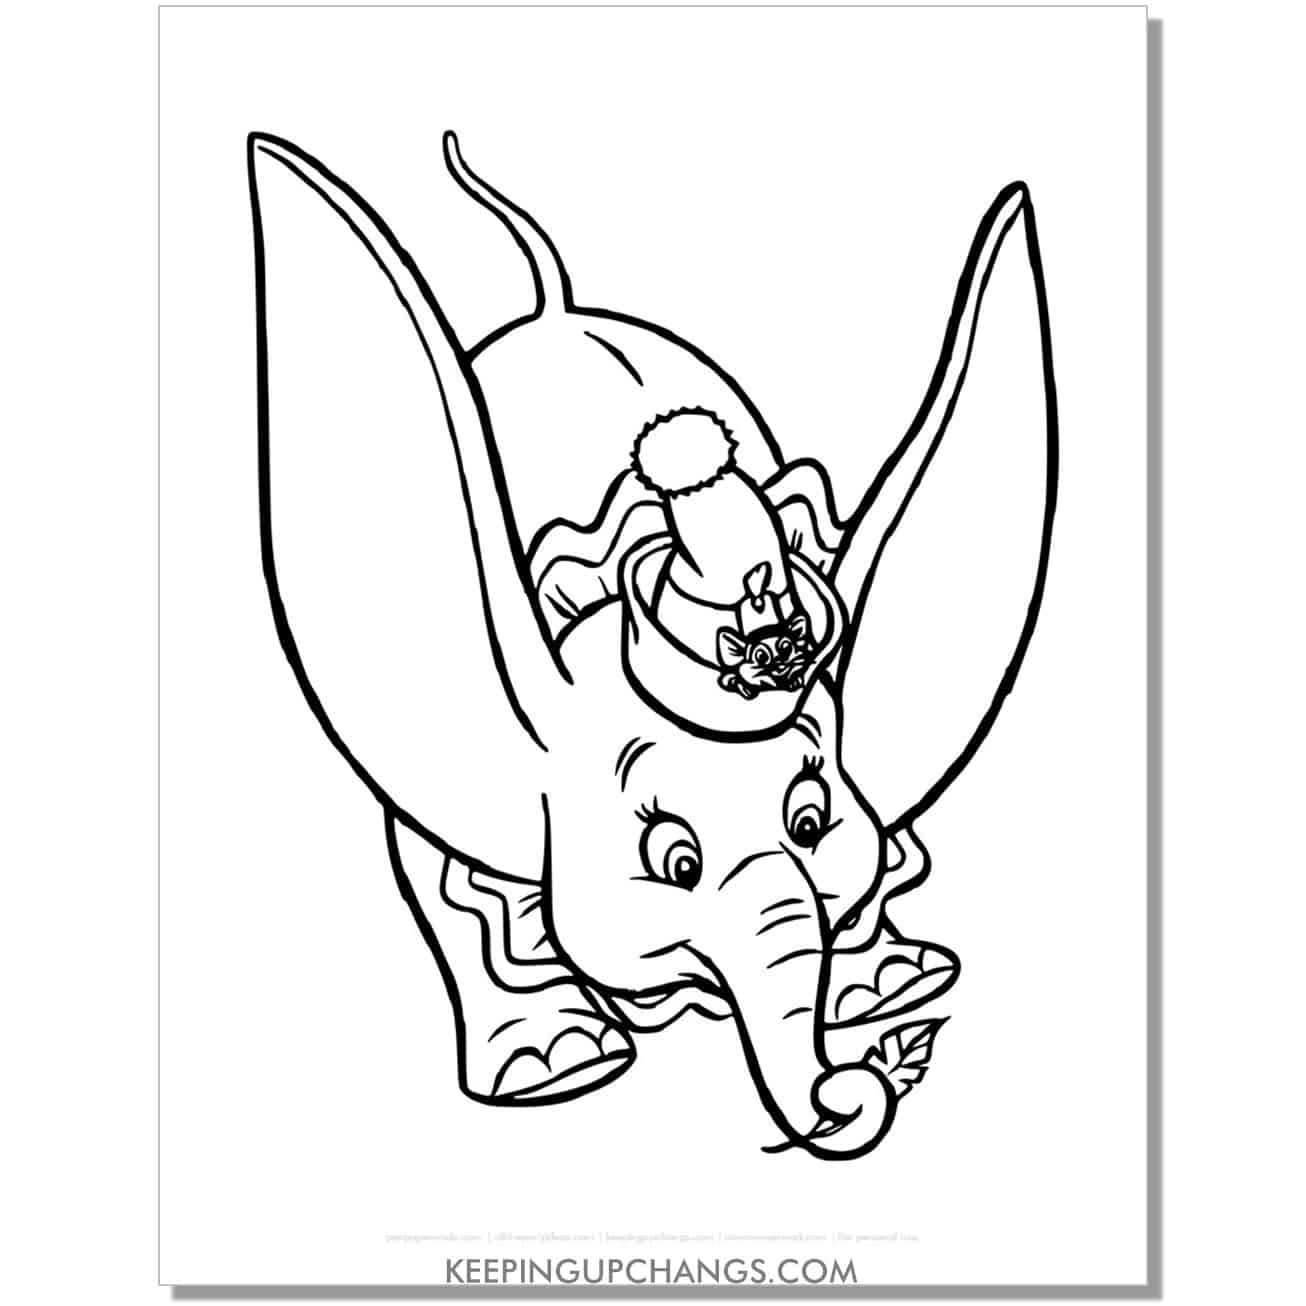 dumbo flying with mouse in hat coloring page, sheet.